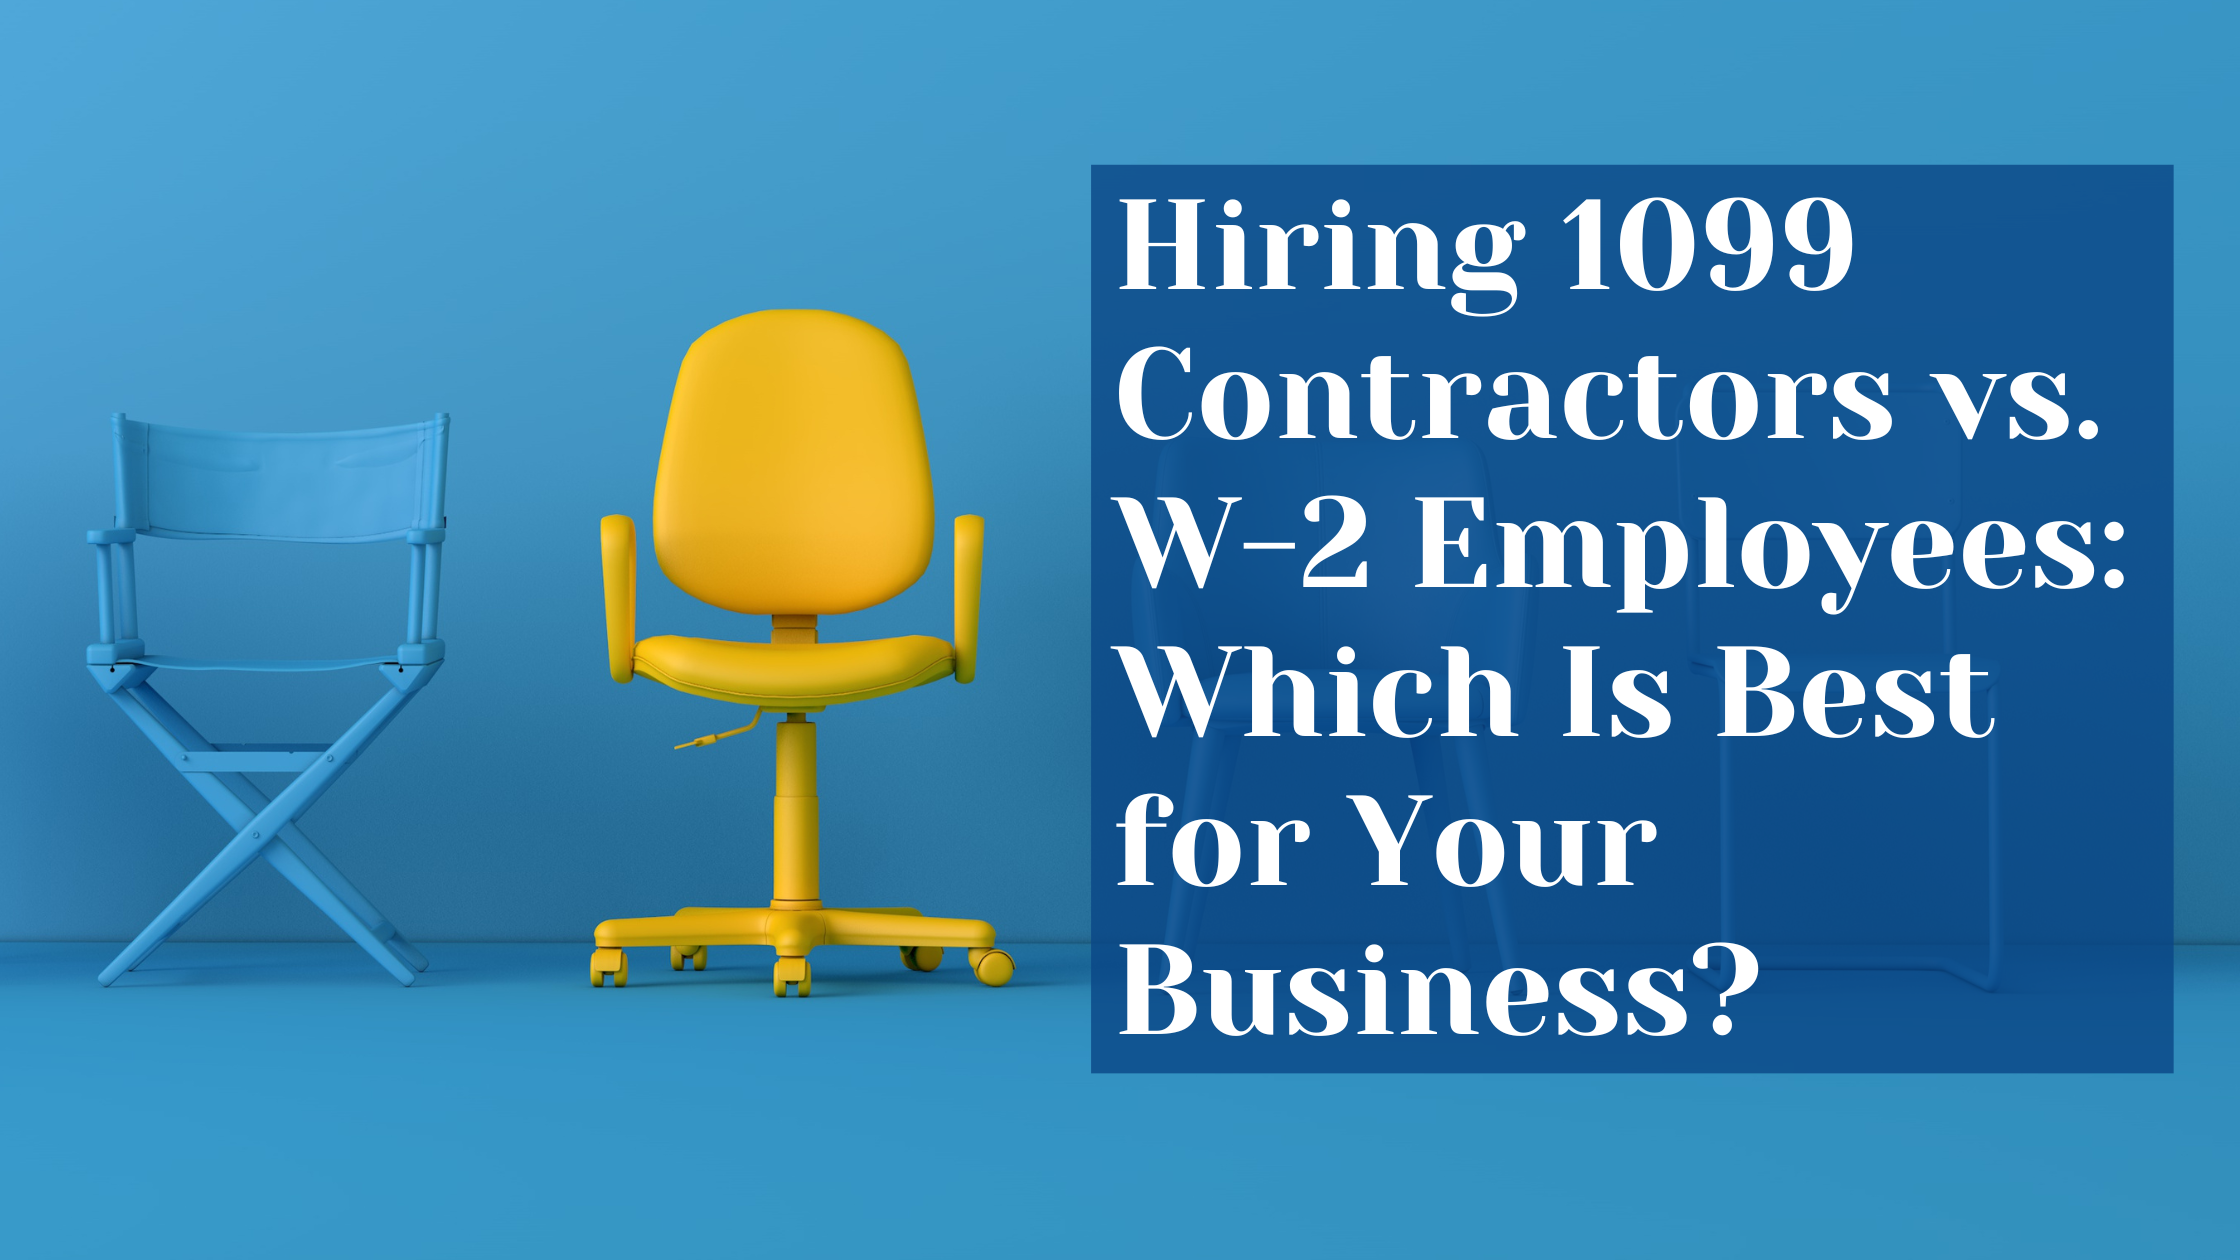 1099 Contractors vs. W-2 Employees: Which Is Best for Your Business?